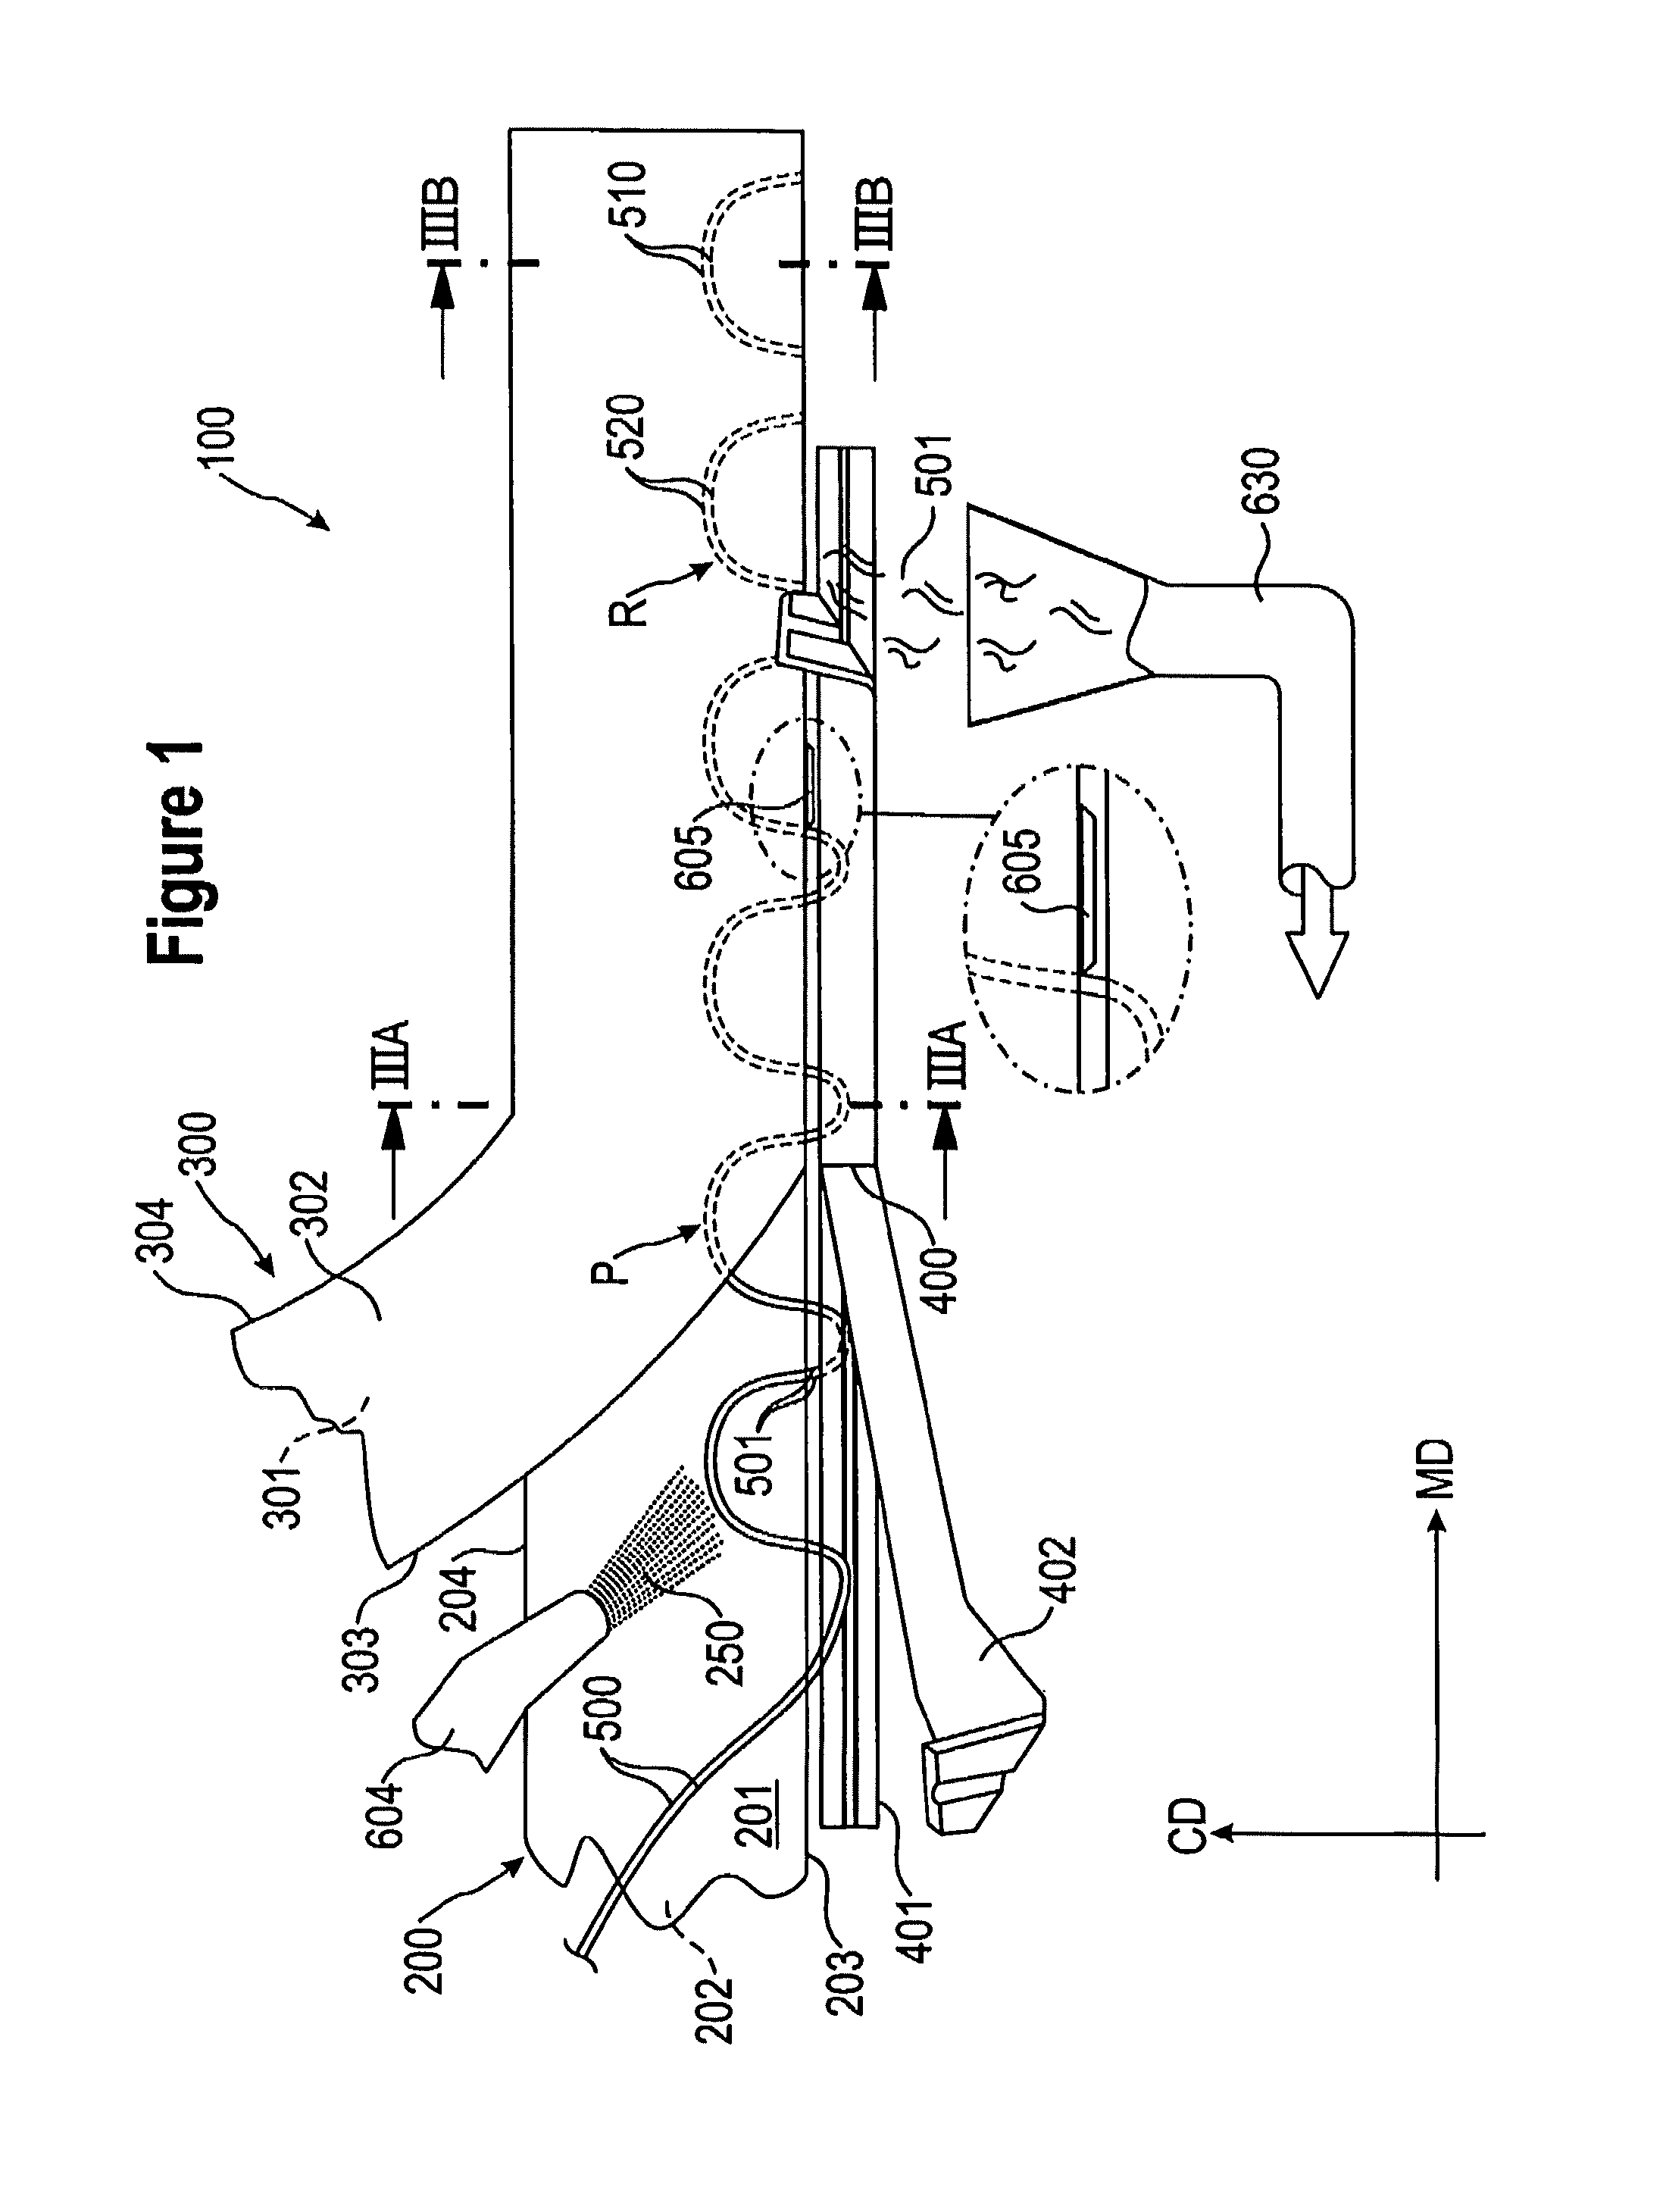 Method and apparatus for trimming material from a web